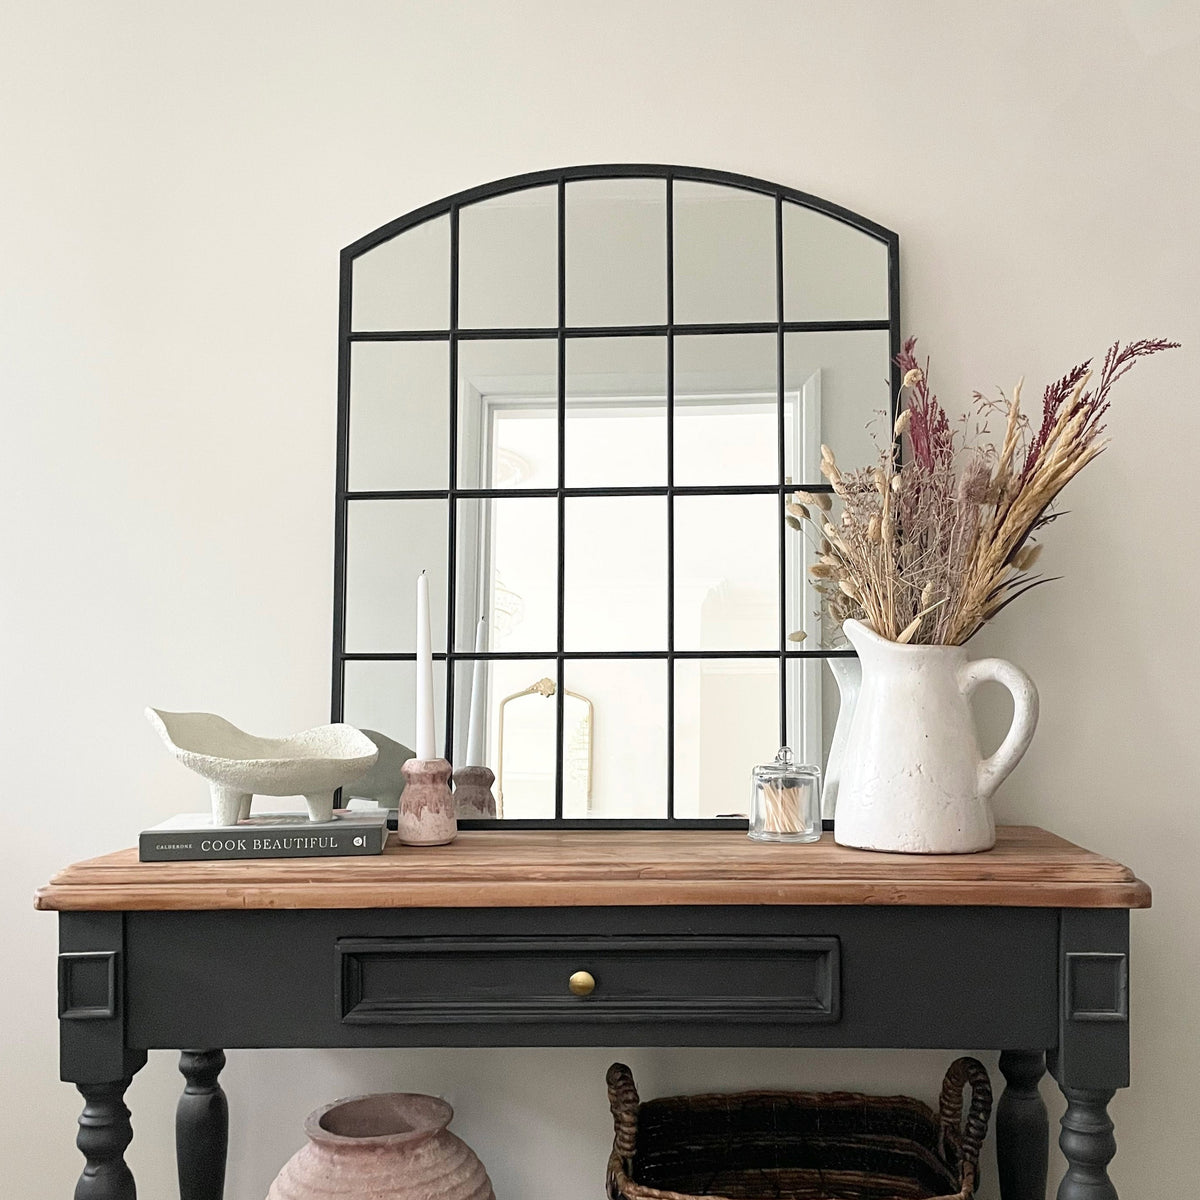 Black industrial arched metal window mirror displayed on console table